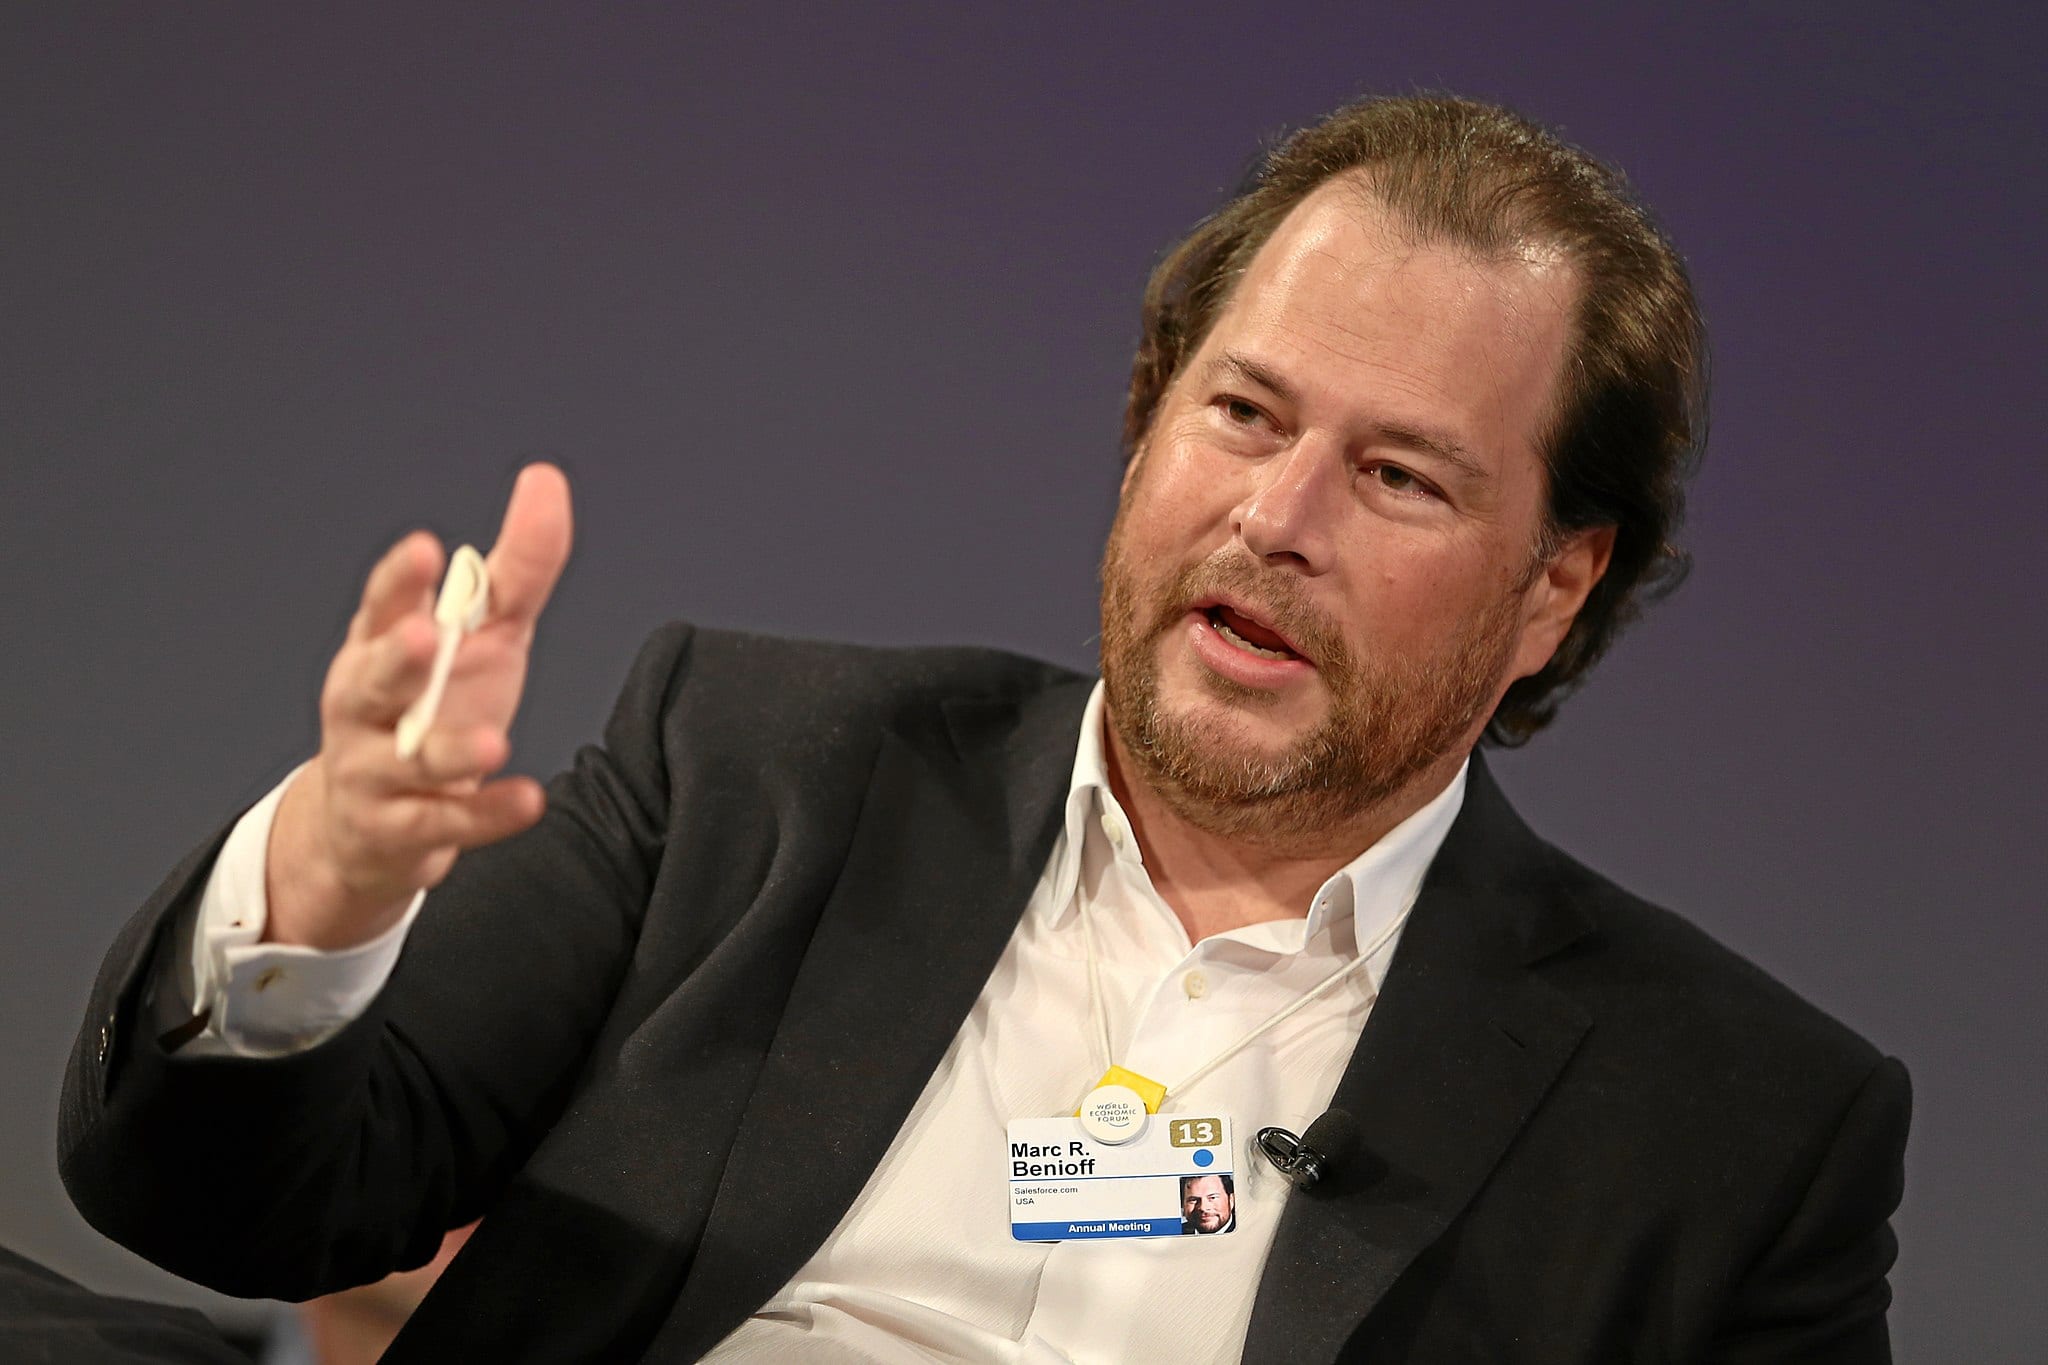 2048px Marc R. Benioff World Economic Forum 2013 8 Famous People Who Got Rich off of Their Side Hustles